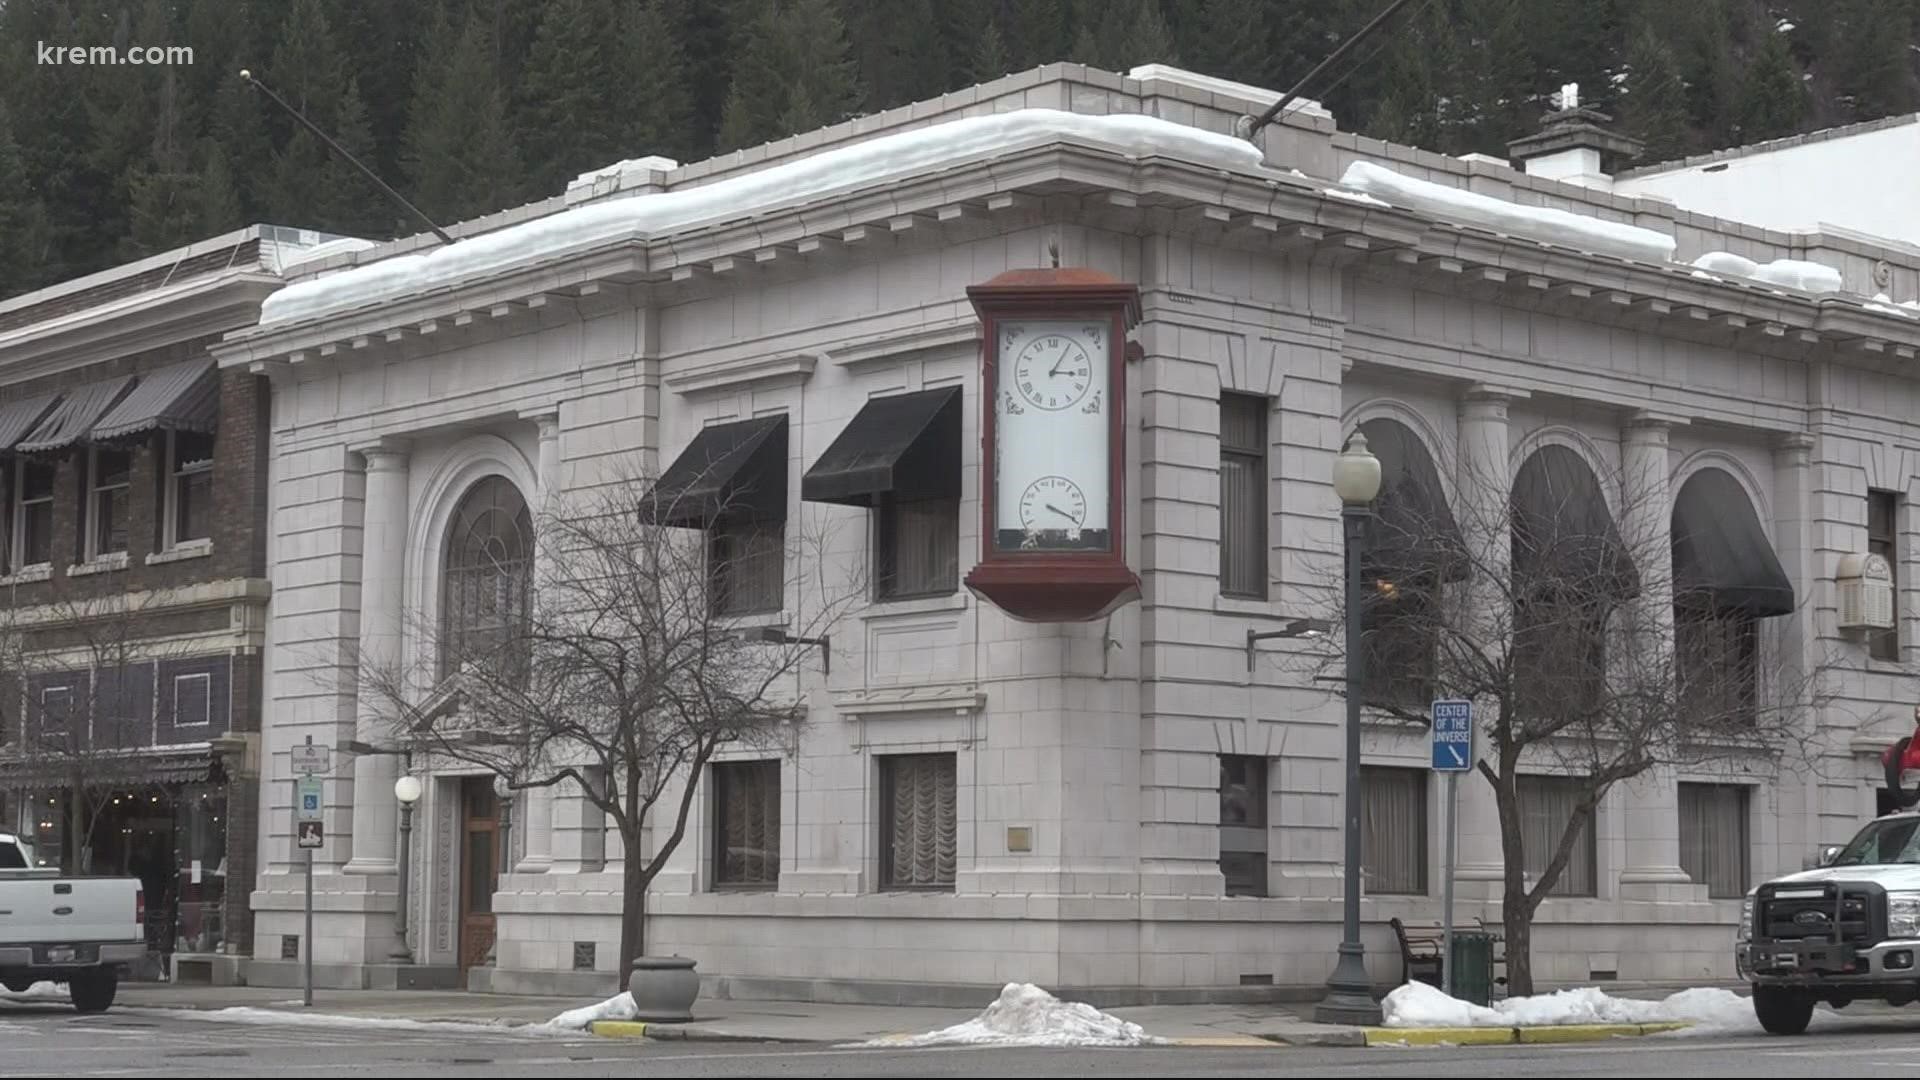 After U.S. Bank closed their only branch in Wallace in late January, Mountain West Bank announced they're opening up a new branch in the historic town.